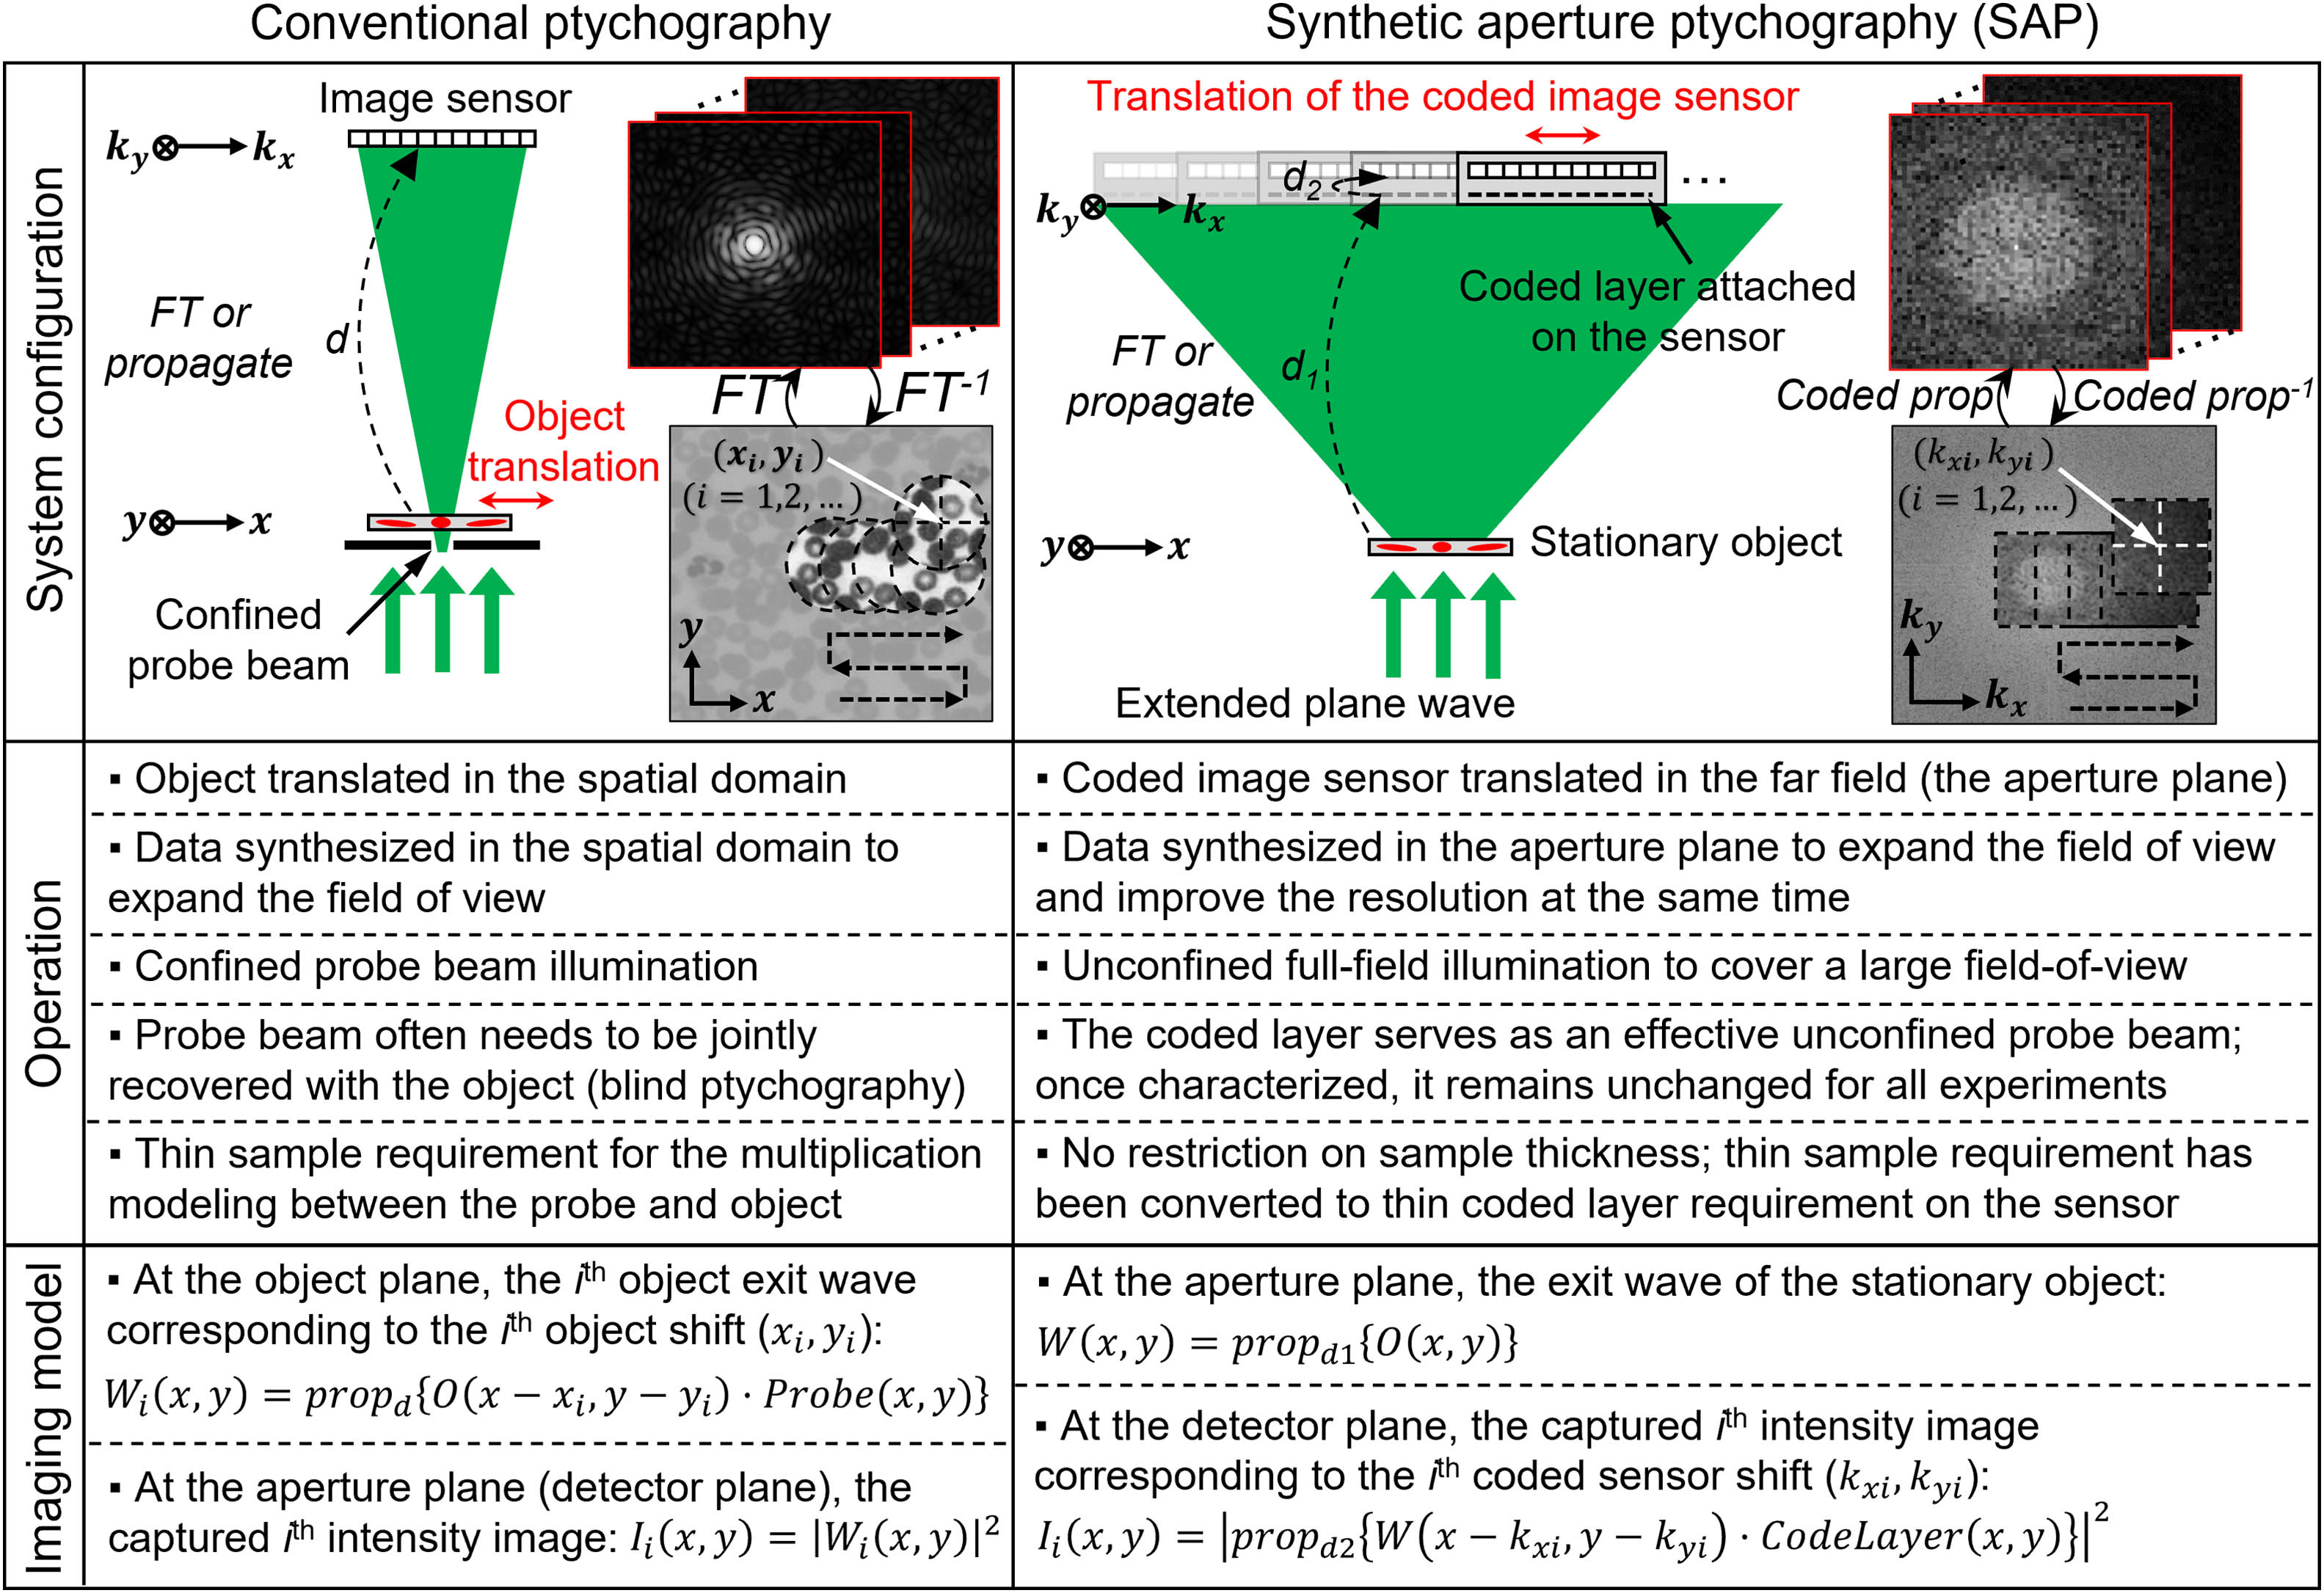 Comparison between conventional ptychography and SAP. Conventional ptychography translates the object over a confined probe beam in the spatial domain and acquires diffraction data at the far field. During the reconstruction process, conventional ptychography stitches the information in the spatial domain to expand the field of view. SAP illuminates the stationary object with an extended plane wave and translates a coded sensor at the far field for data acquisition. In the reconstruction process, SAP stitches the information in the intermediate aperture plane for object recovery. It can widen the field of view in real space and expand the spatial-frequency bandwidth in reciprocal space at the same time. The dashed arrows present free-space propagation over certain distances.